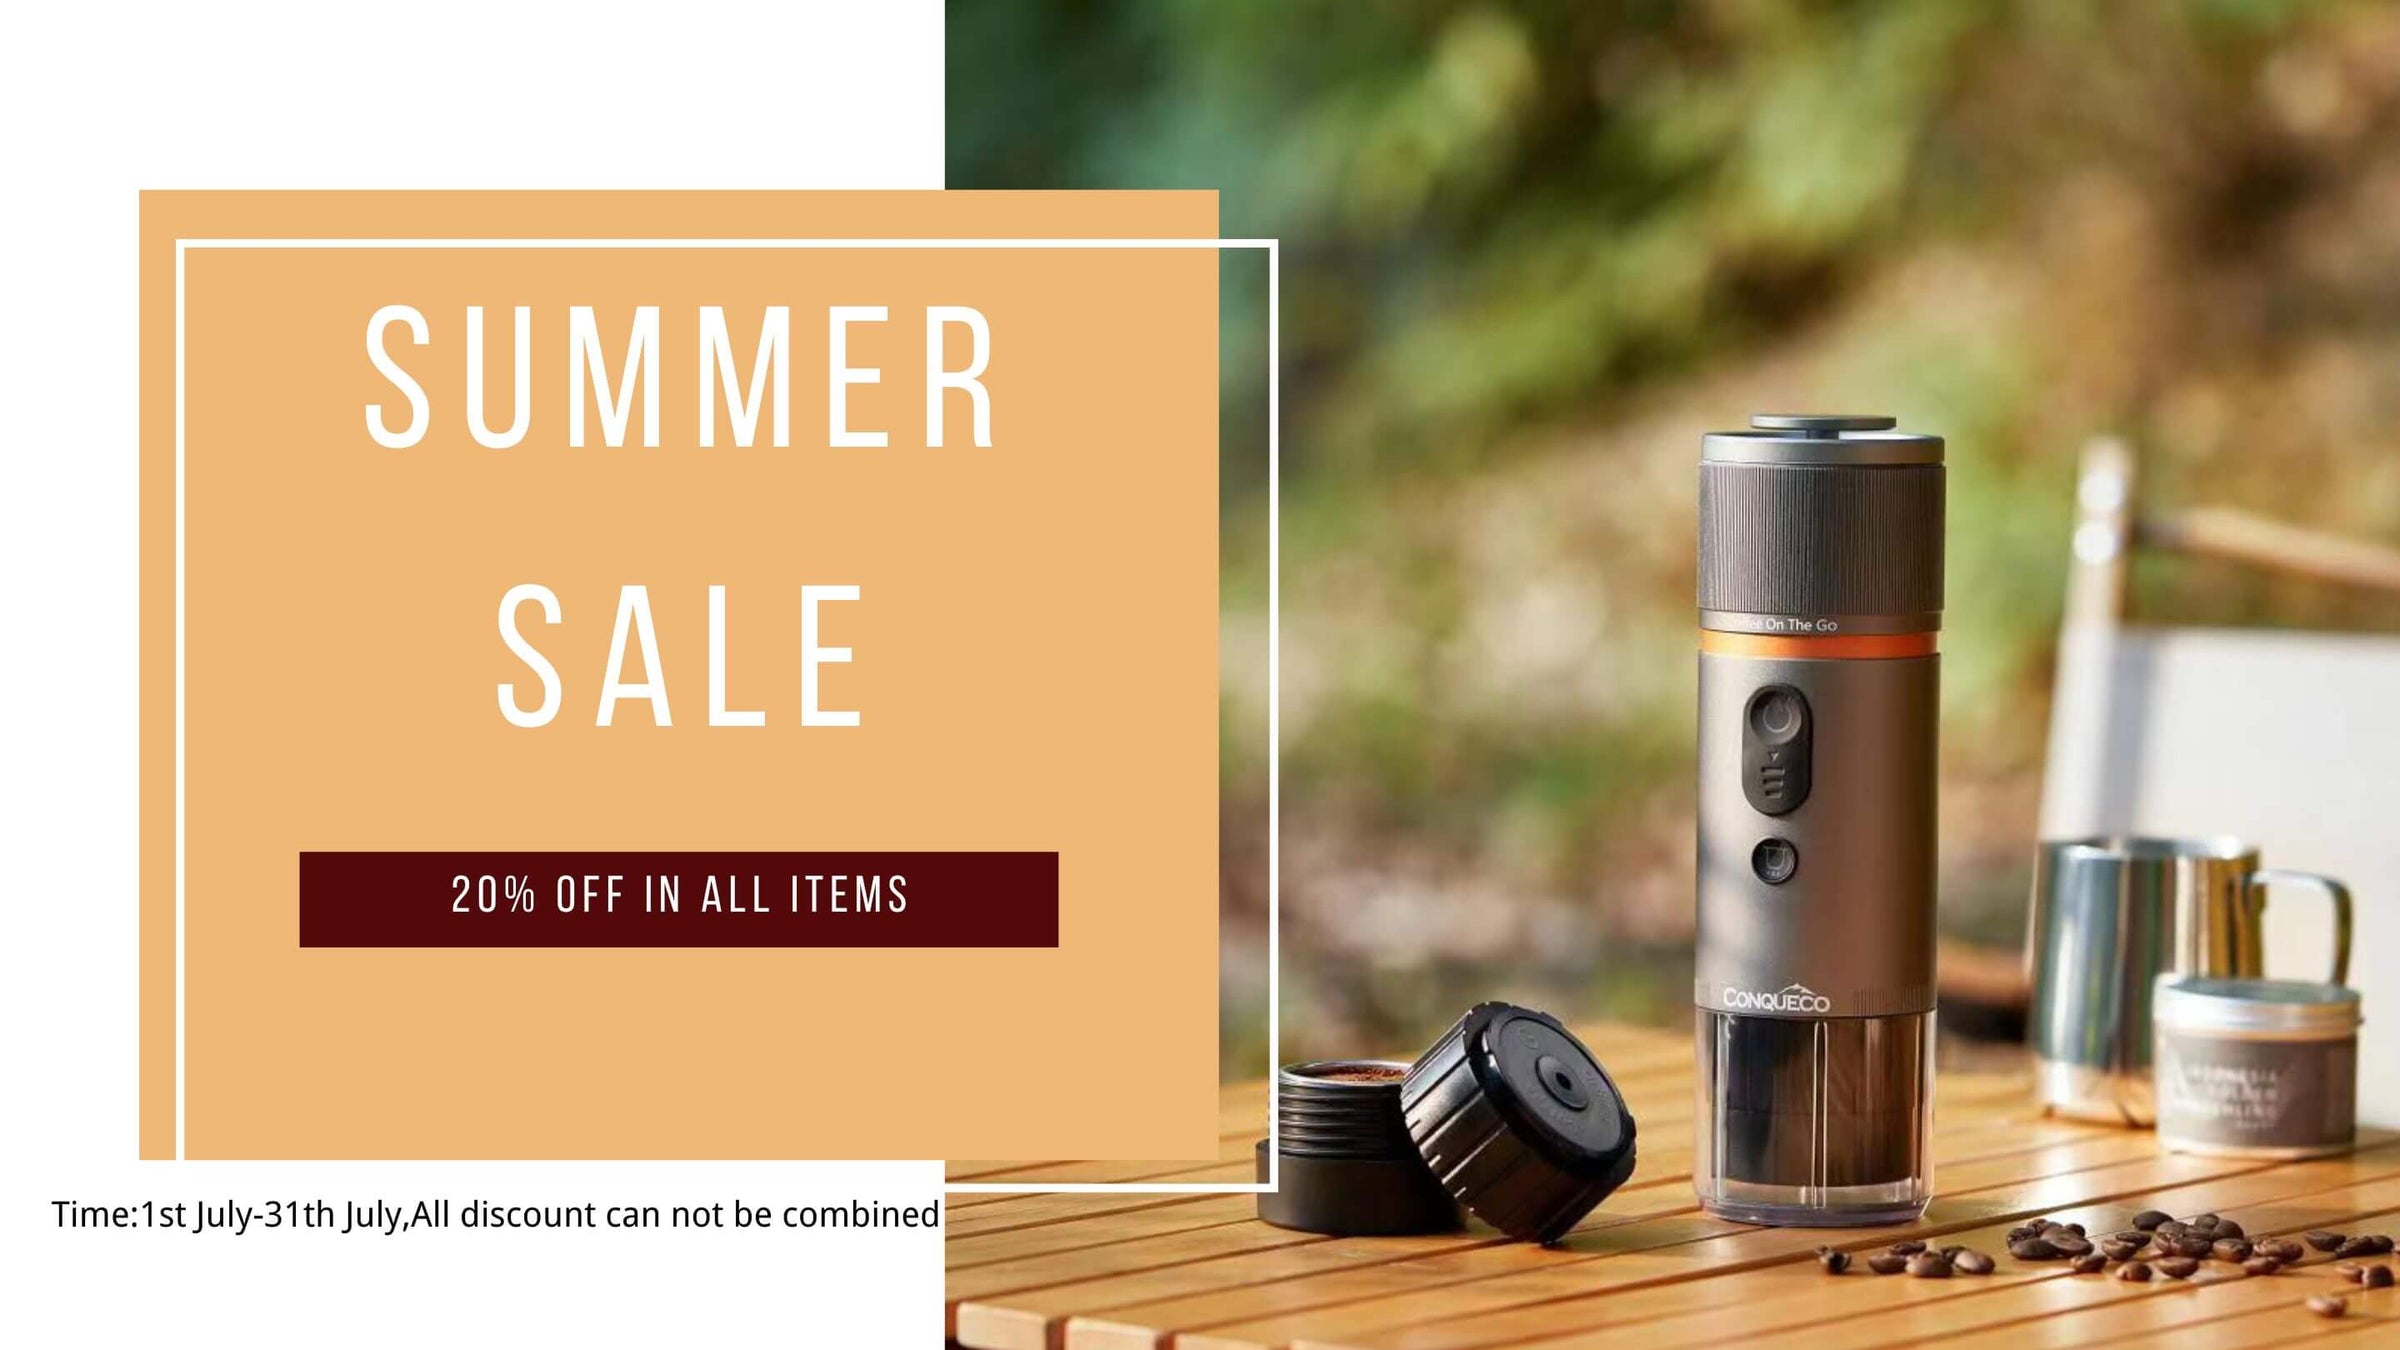 Summer sale-conqueco heated vest and jacket,coffee machine